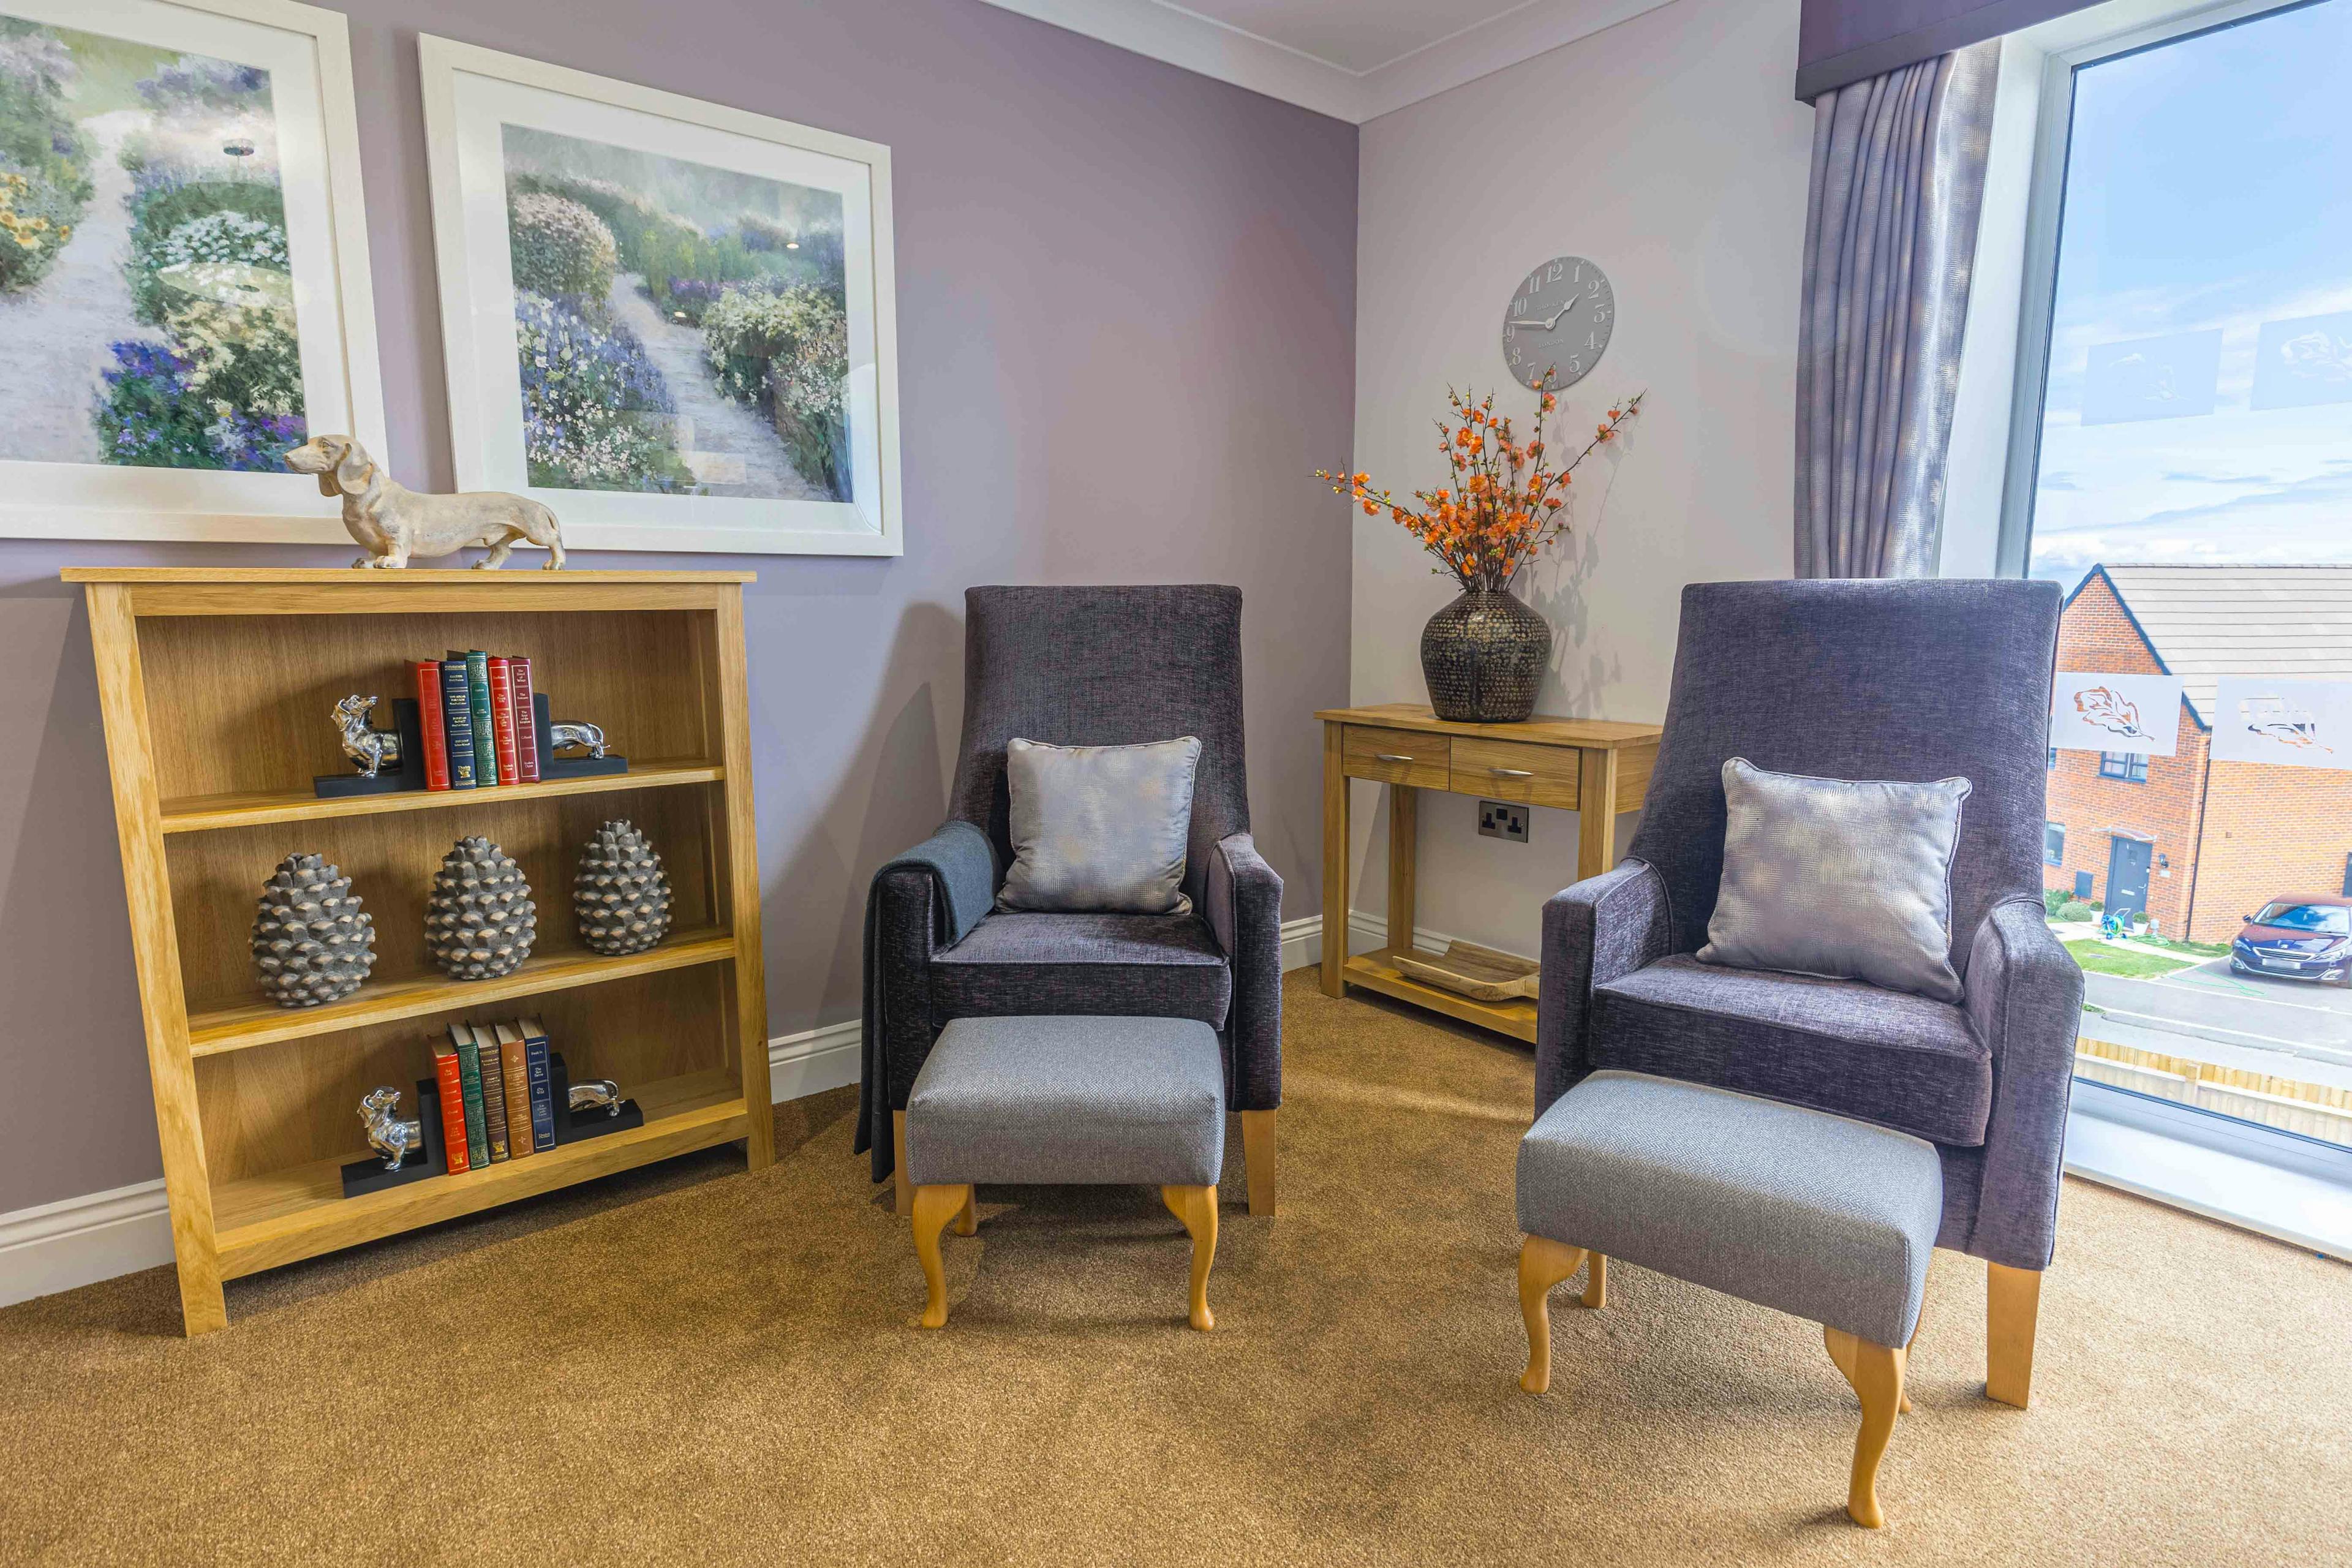 Communal Area at Elgar Court Care Home in Malvern, Worcestershire